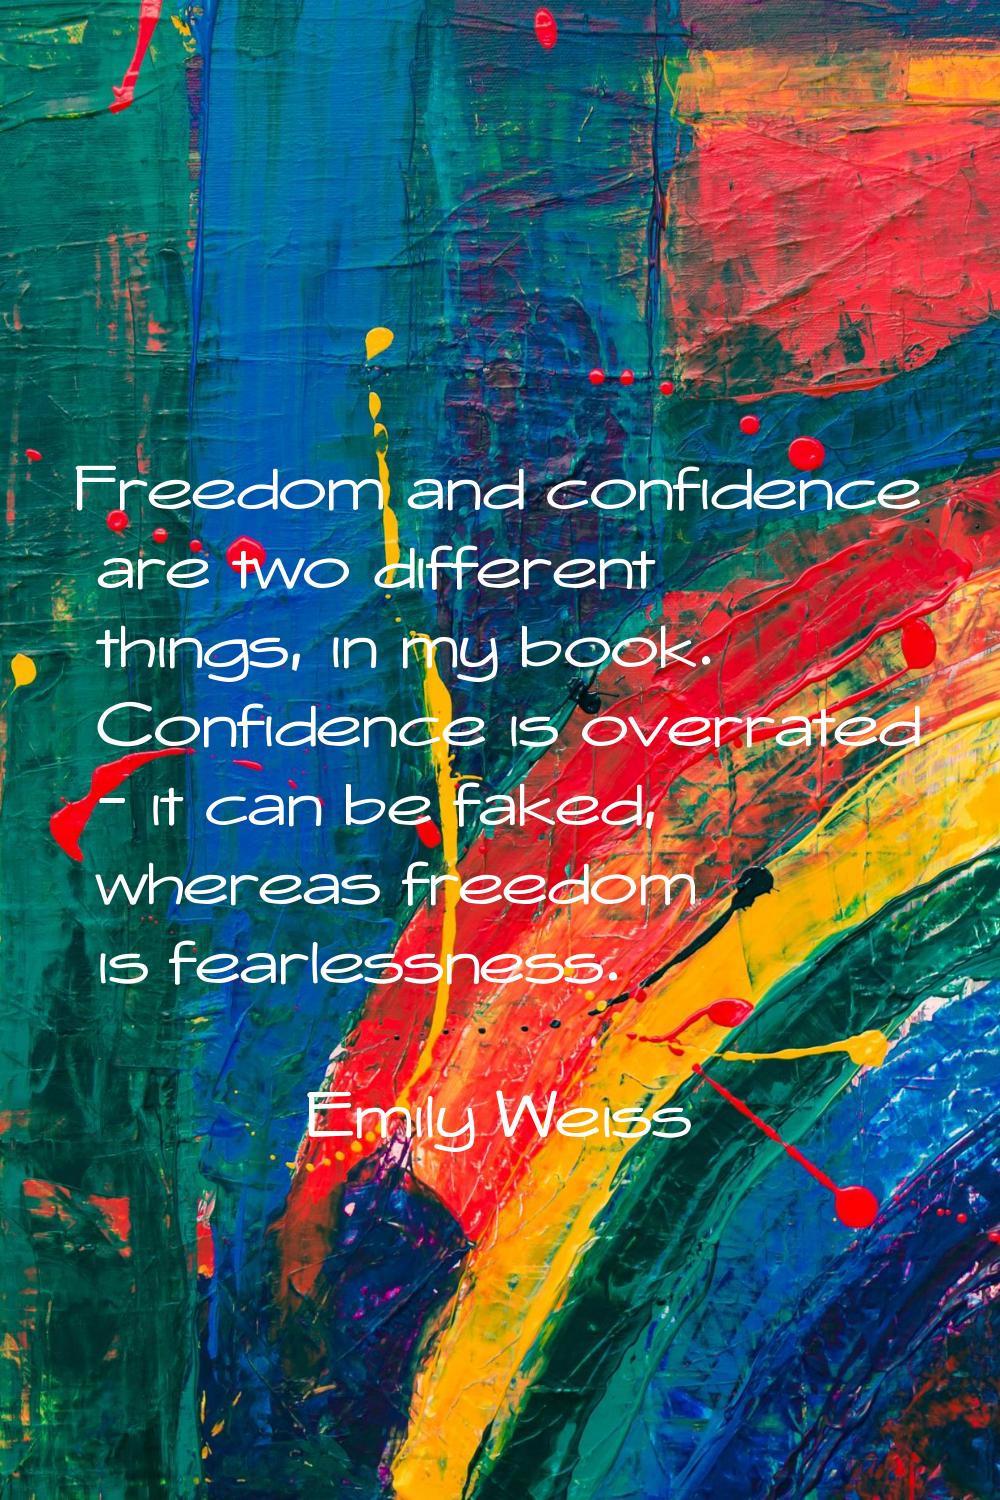 Freedom and confidence are two different things, in my book. Confidence is overrated - it can be fa